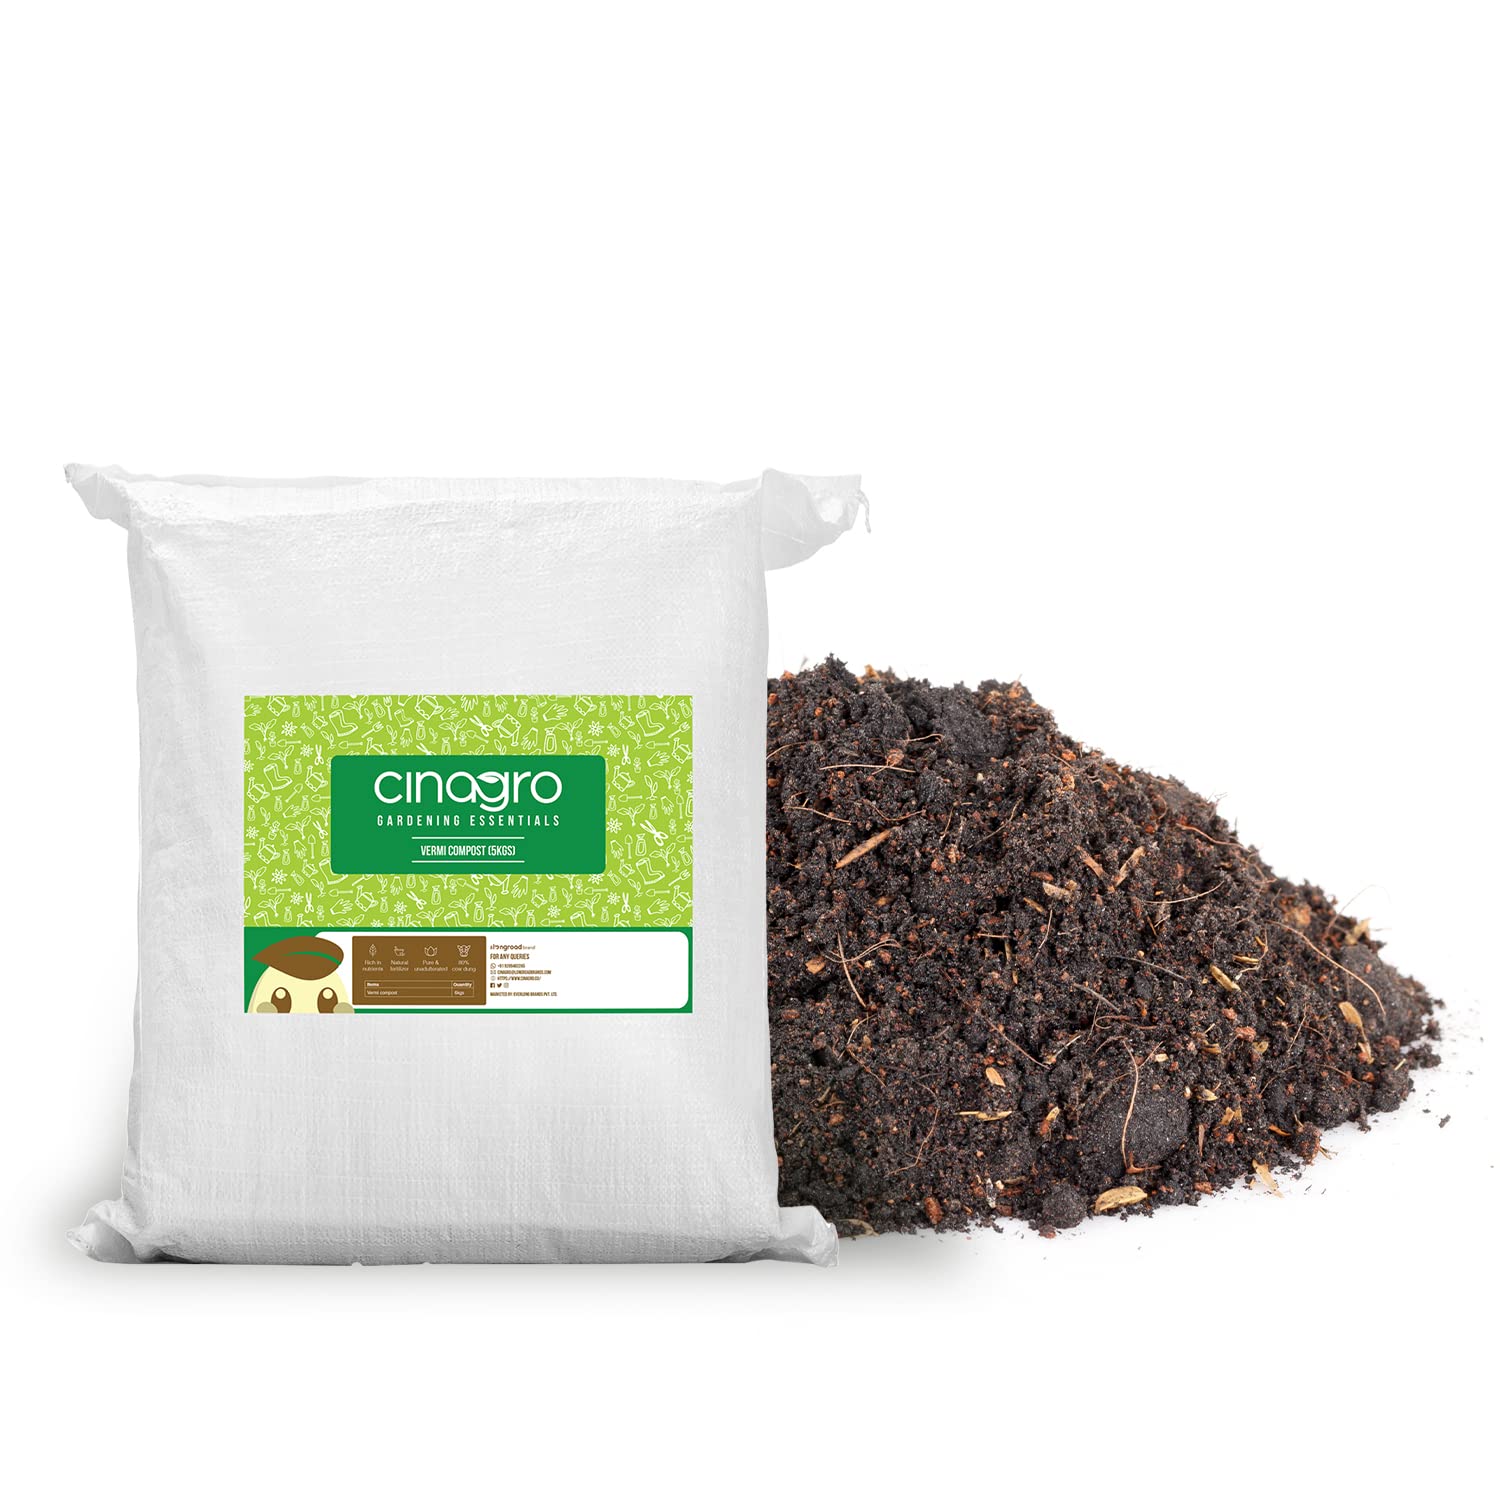 cinagro cowdung fortified vermicompost for indoor, outdoor plants | 100% natural & organic growth booster fertilizer | nutrient rich (5 kgs)